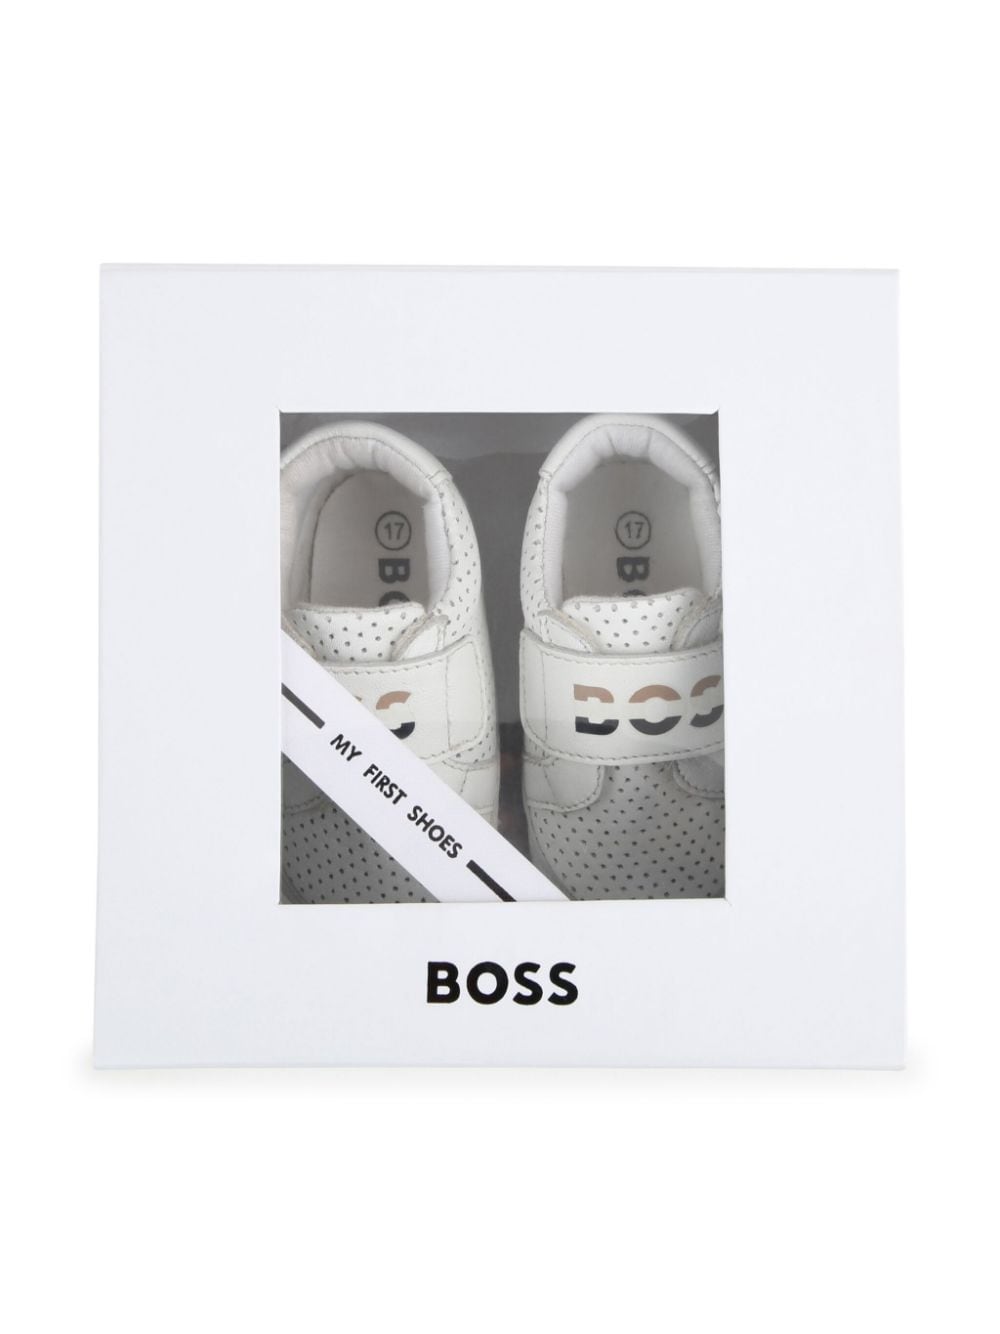 White leather sneakers for newborns